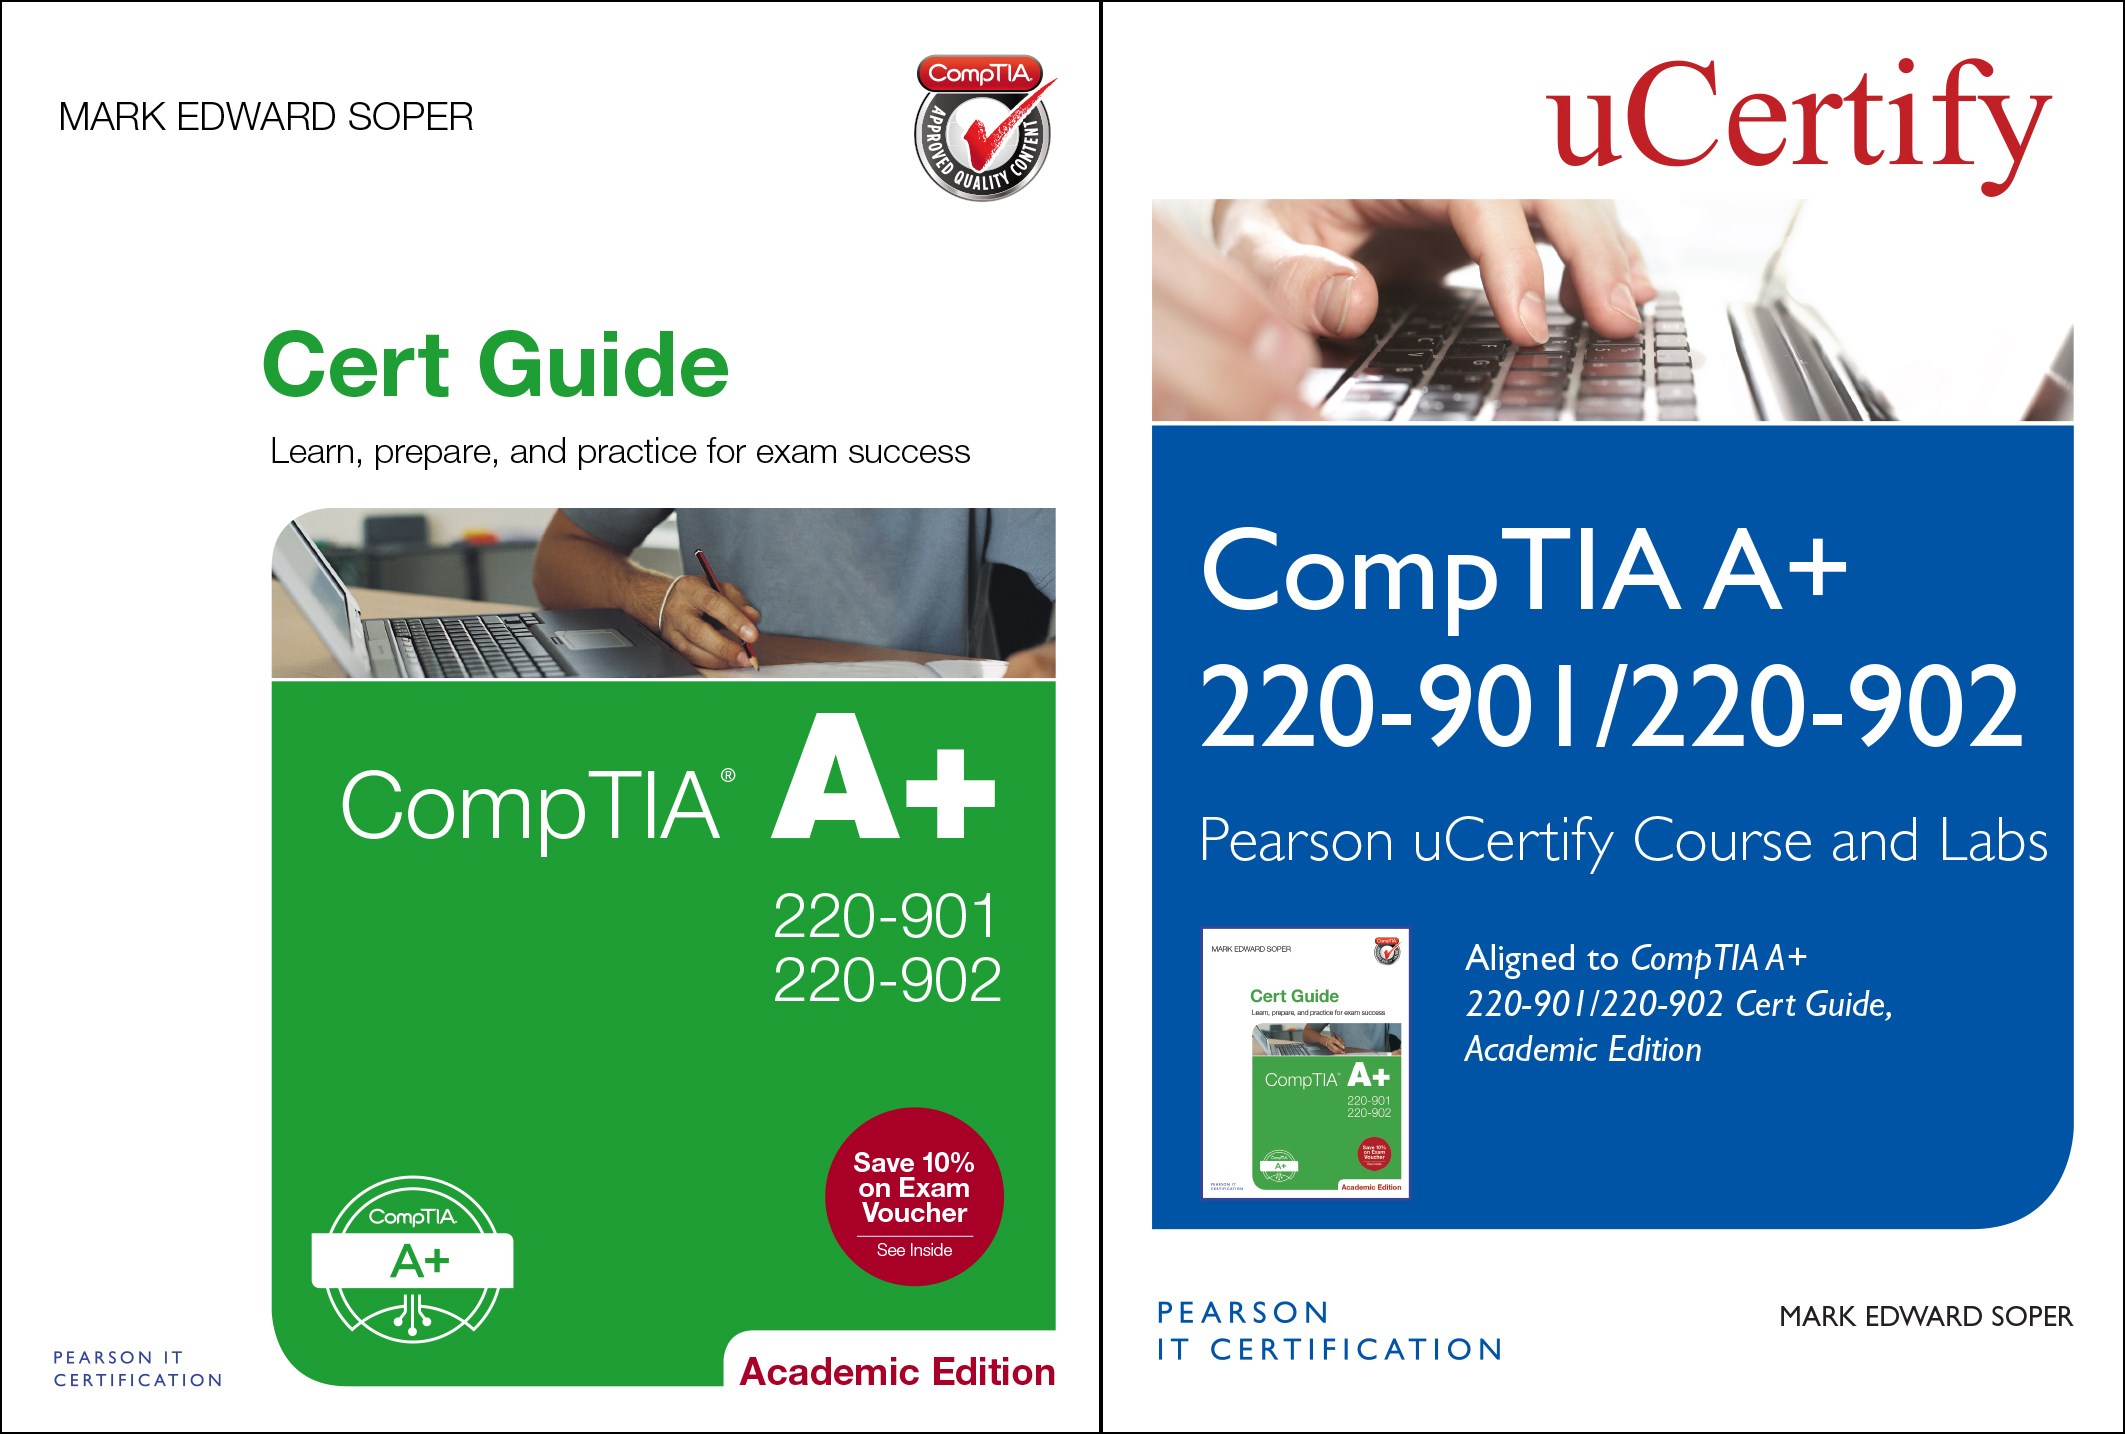 CompTIA A+ 220-901 and 220-902 Cert Guide, Academic Edition Textbook and Pearson uCertify Course and uCertify Labs